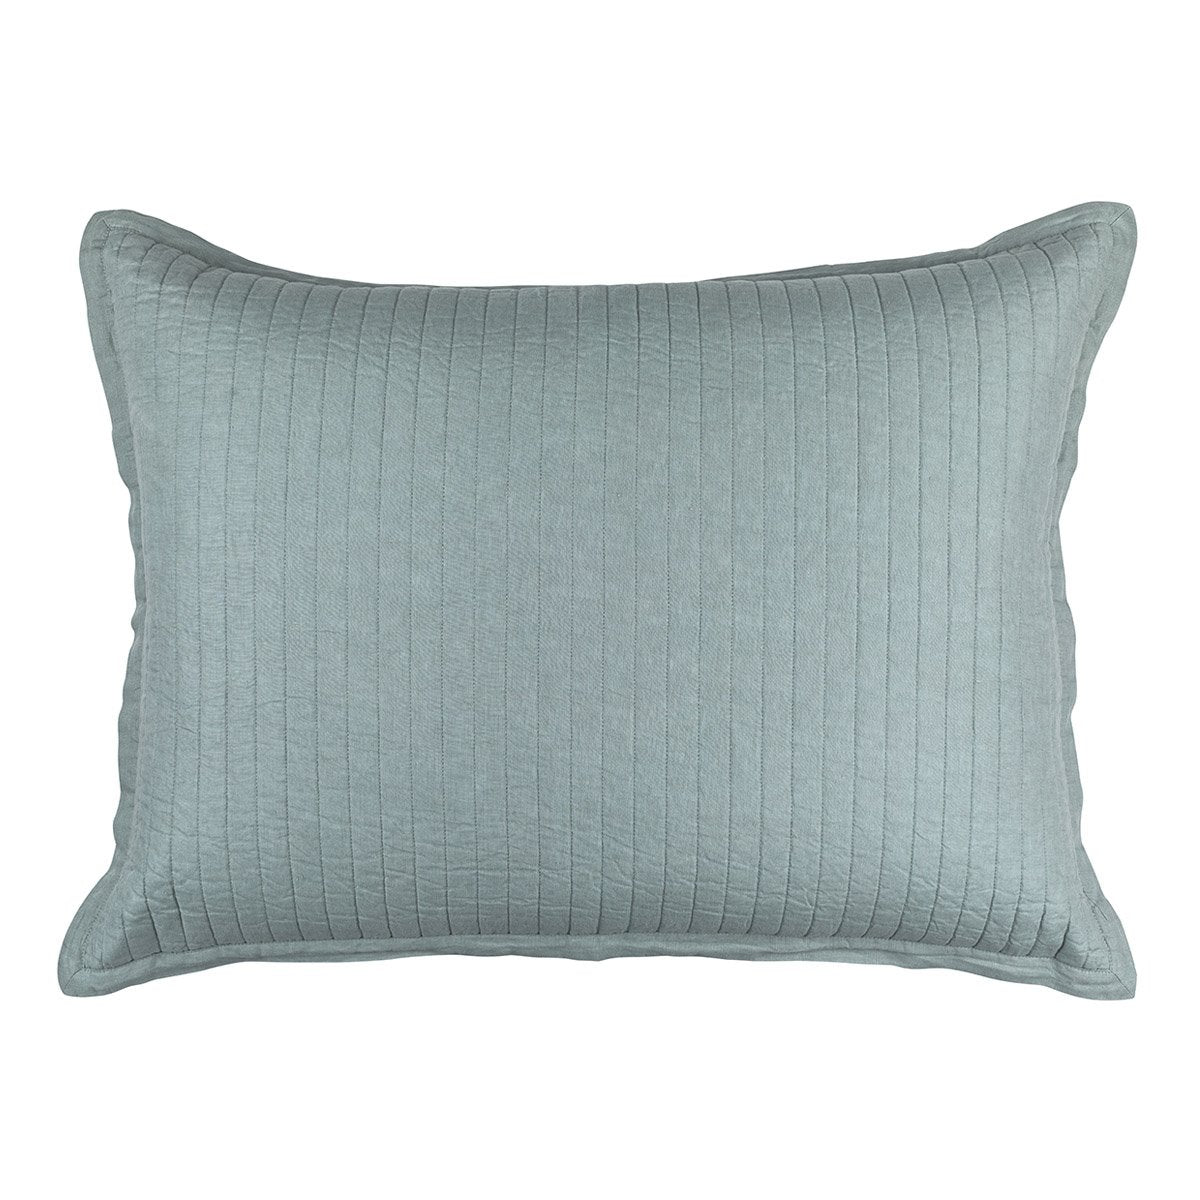 Fig Linens - Lili Alessandra Bedding - Tessa Sky Quilted Luxe Euro Pillow